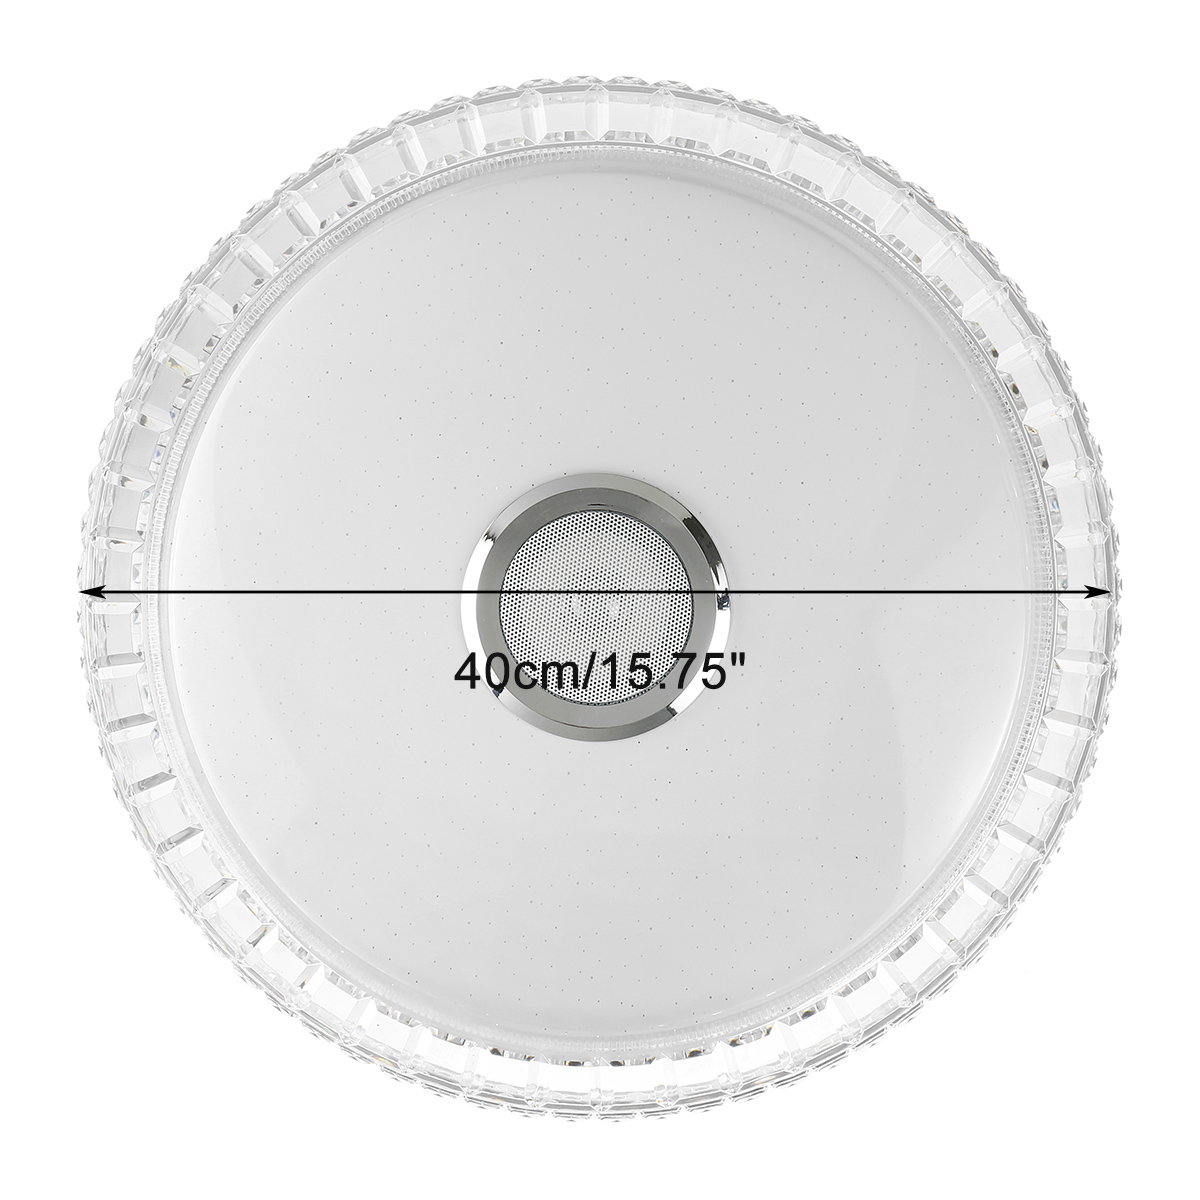 RGB-LED-Ceiling-Lights-Flush-Mount-Smart-bluetooth-Lamp-Remote-Control-Dimmable-1843110-9